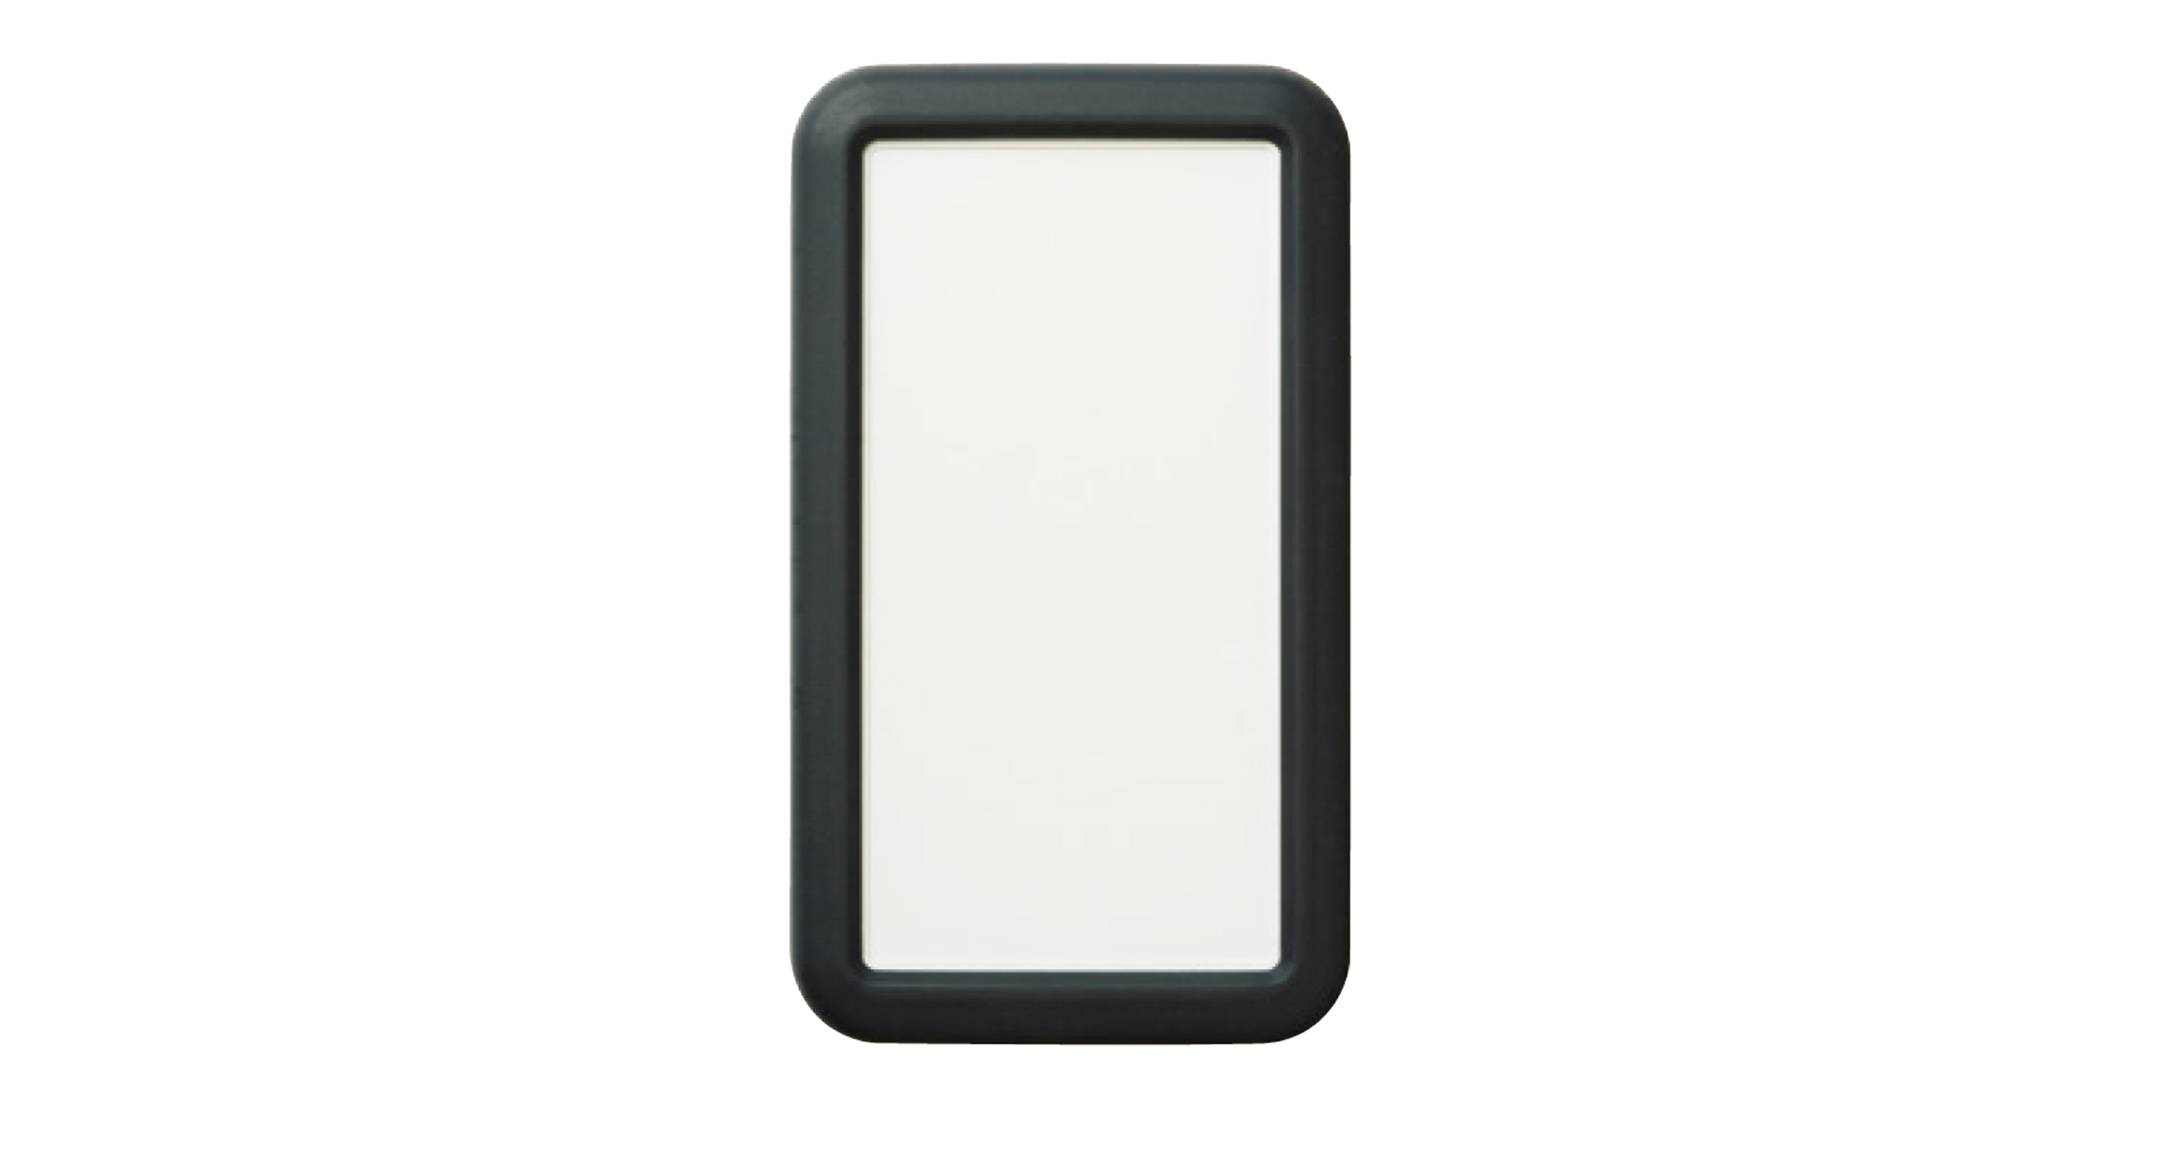 HANDHELD CASE with SILICONE COVER - LCS series:Off-white/Dark gray